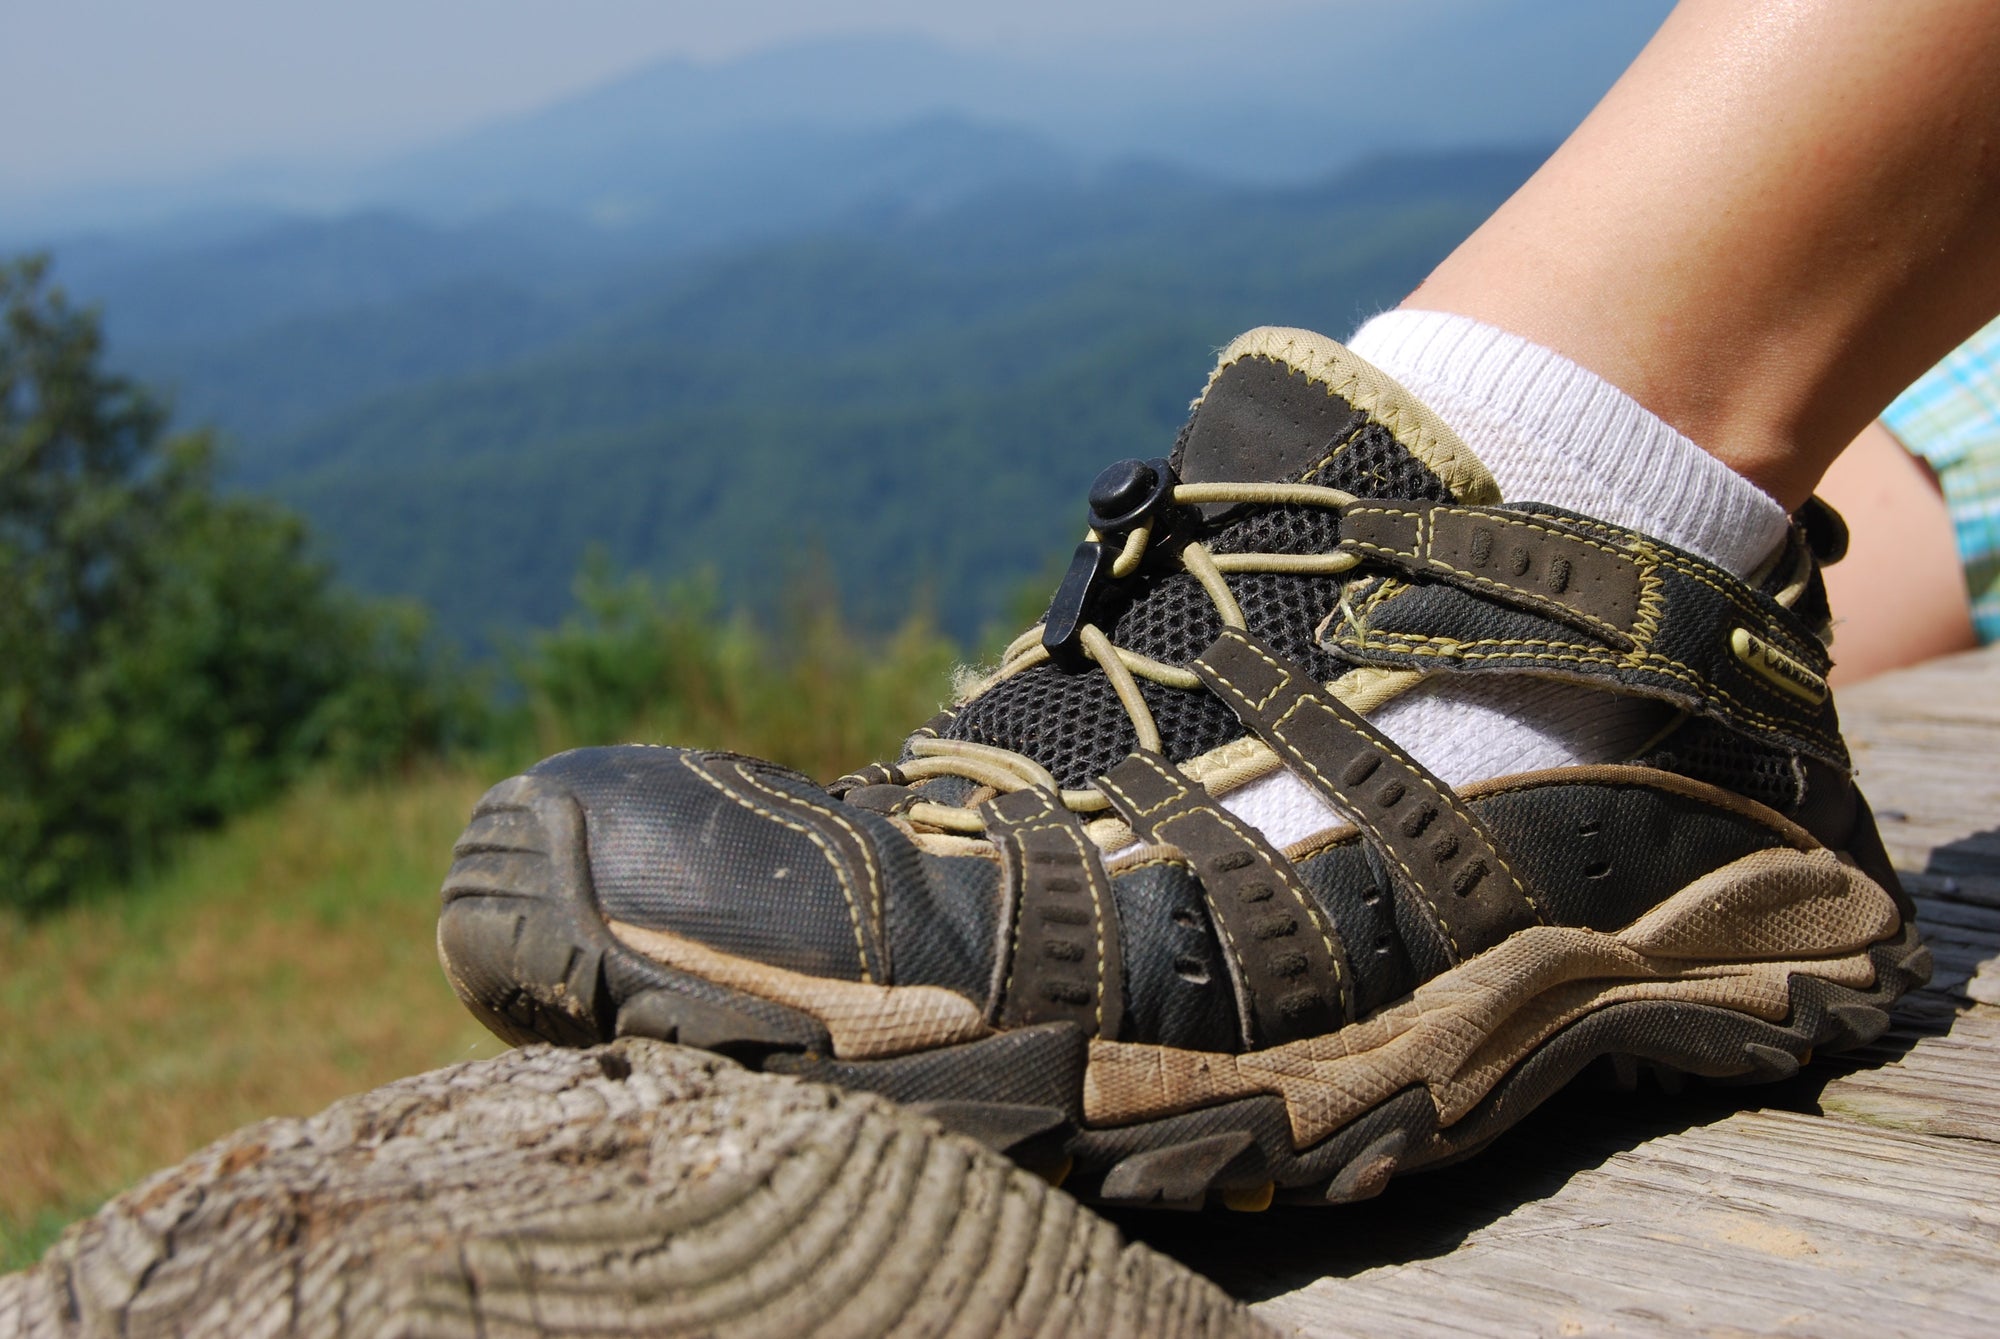 How to Pick the Right Hiking Shoes